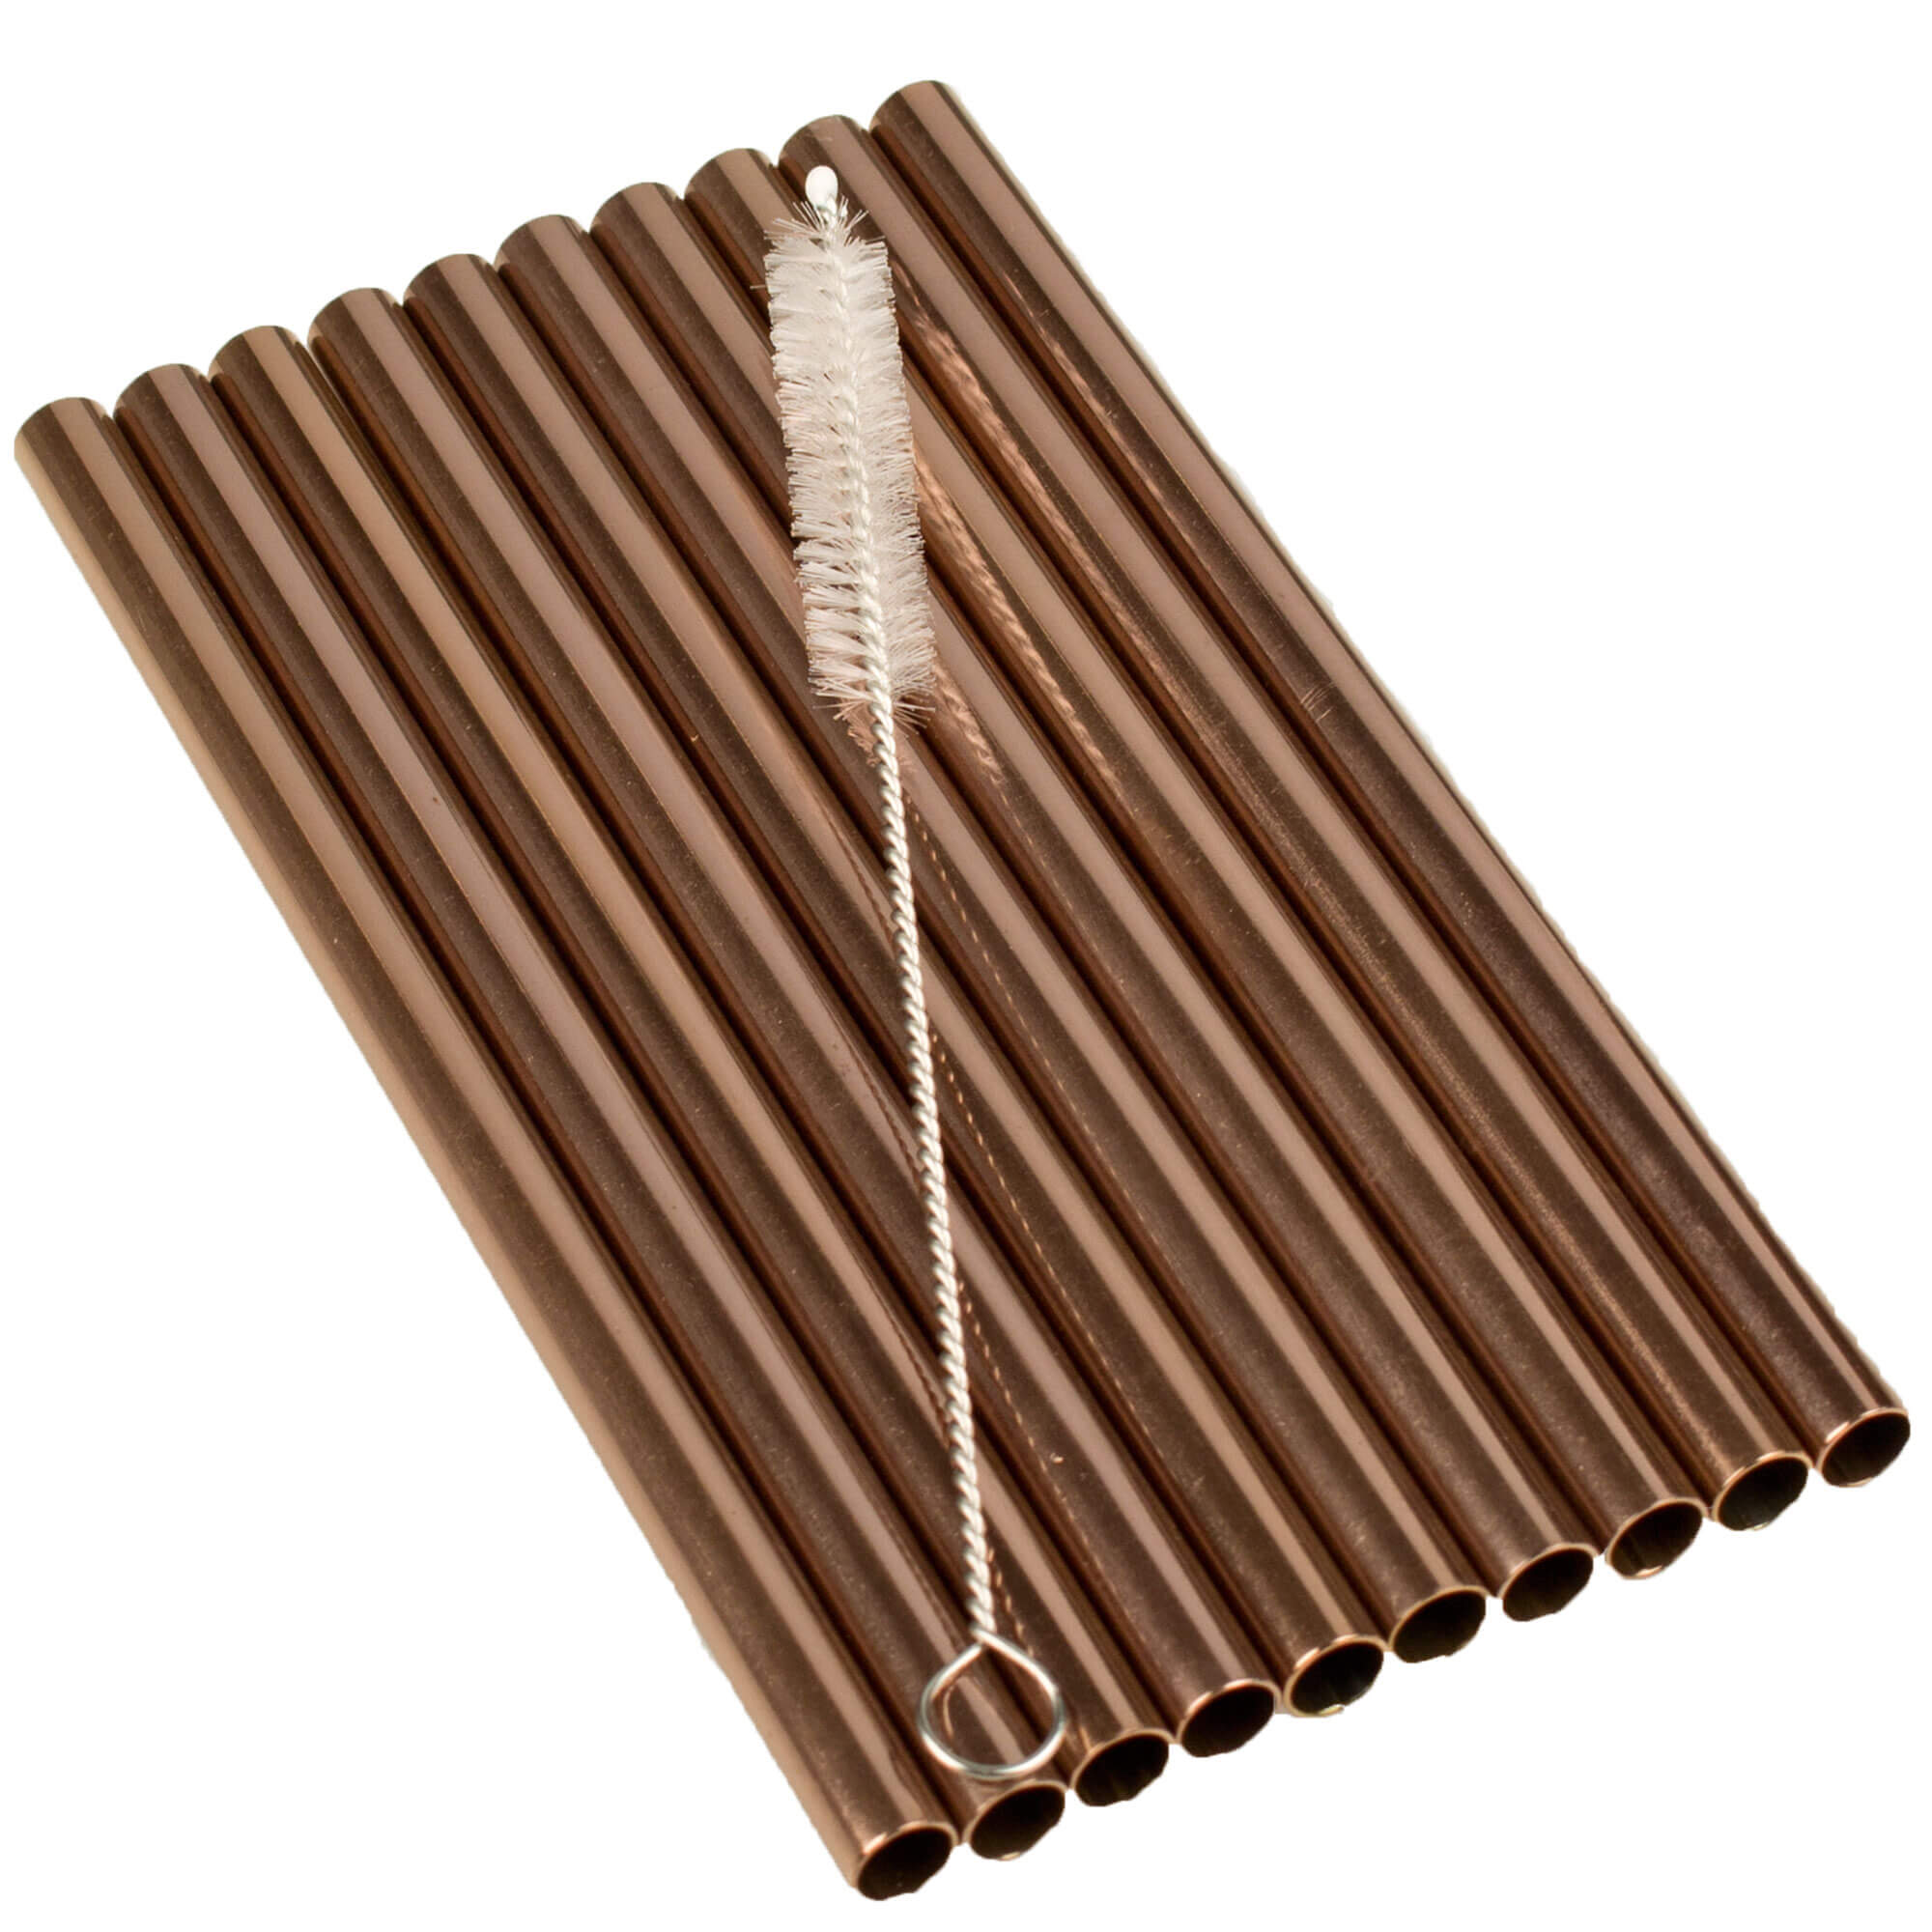 Drinking straws, stainless steel (8x150mm), copper-colored - 10 pcs. plus cleaning brush